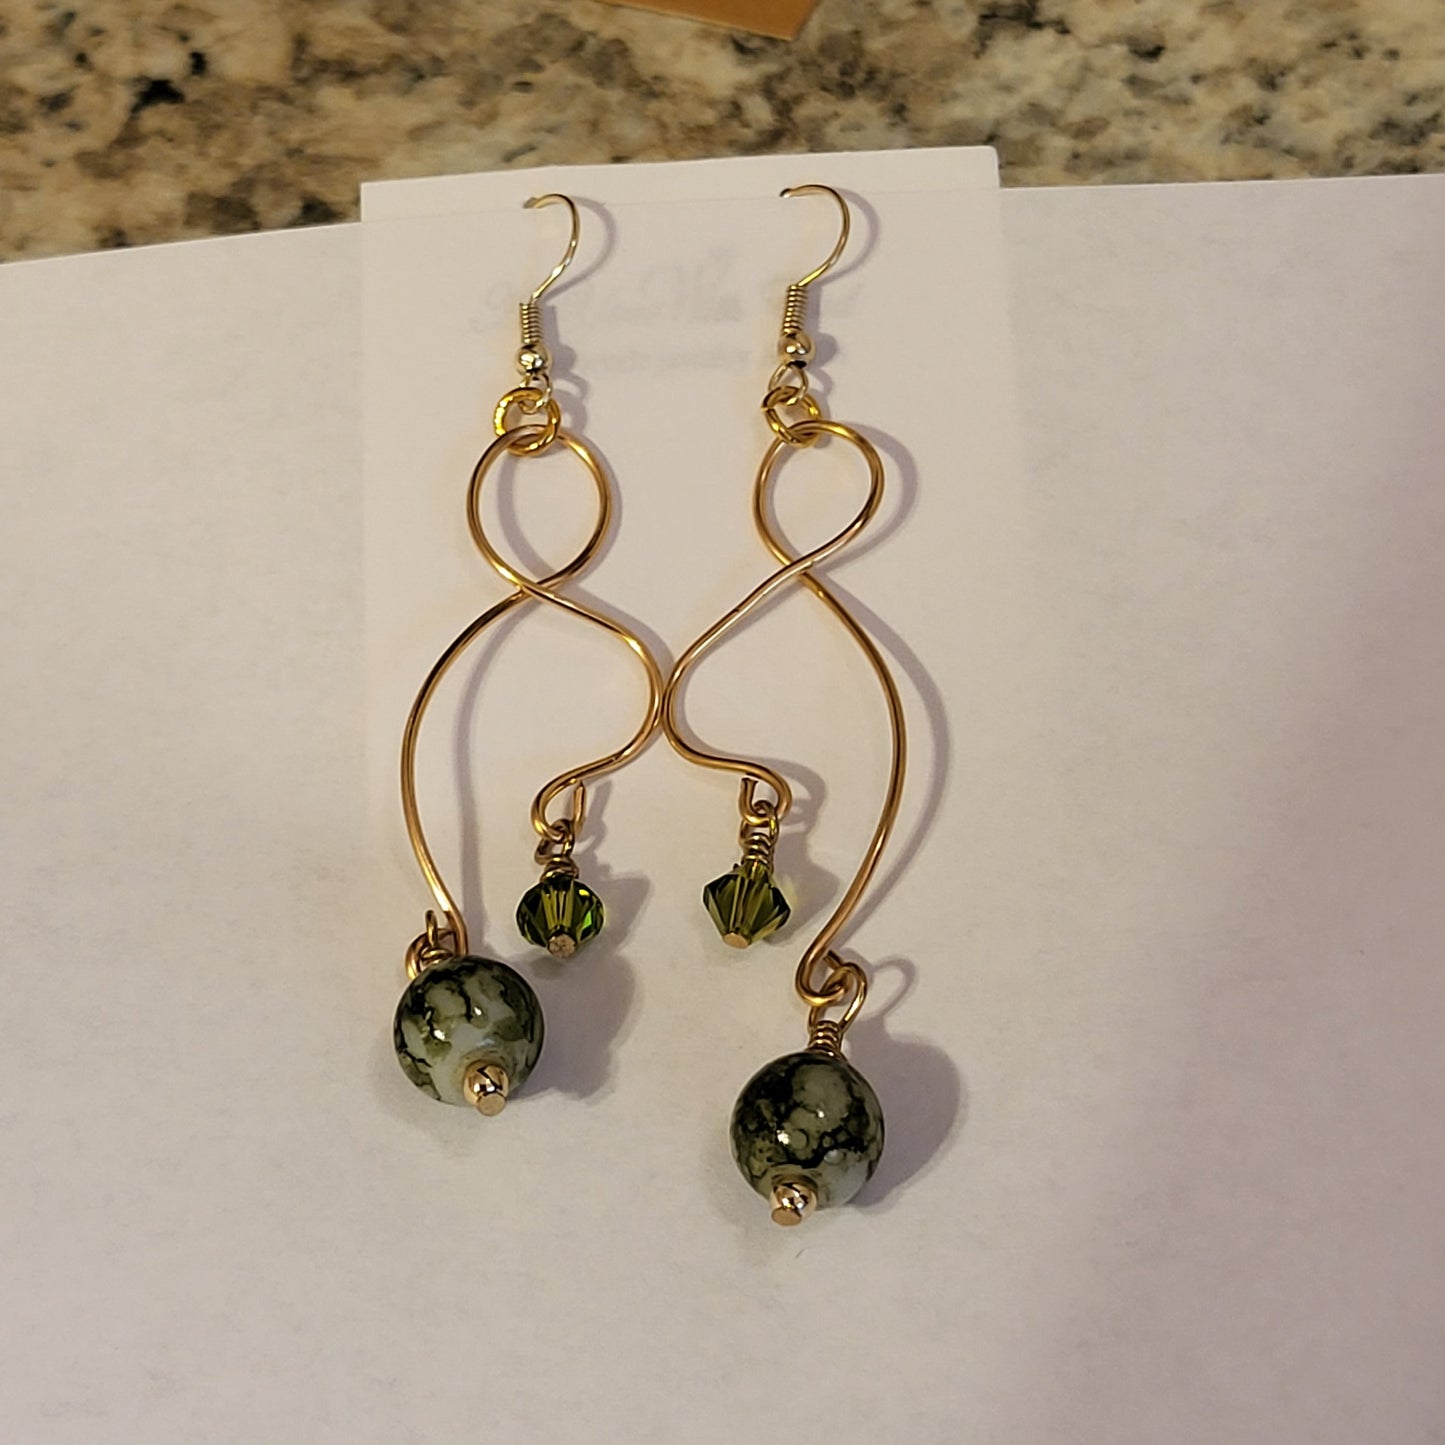 Long Twisted Wire with Green Bead Earrings